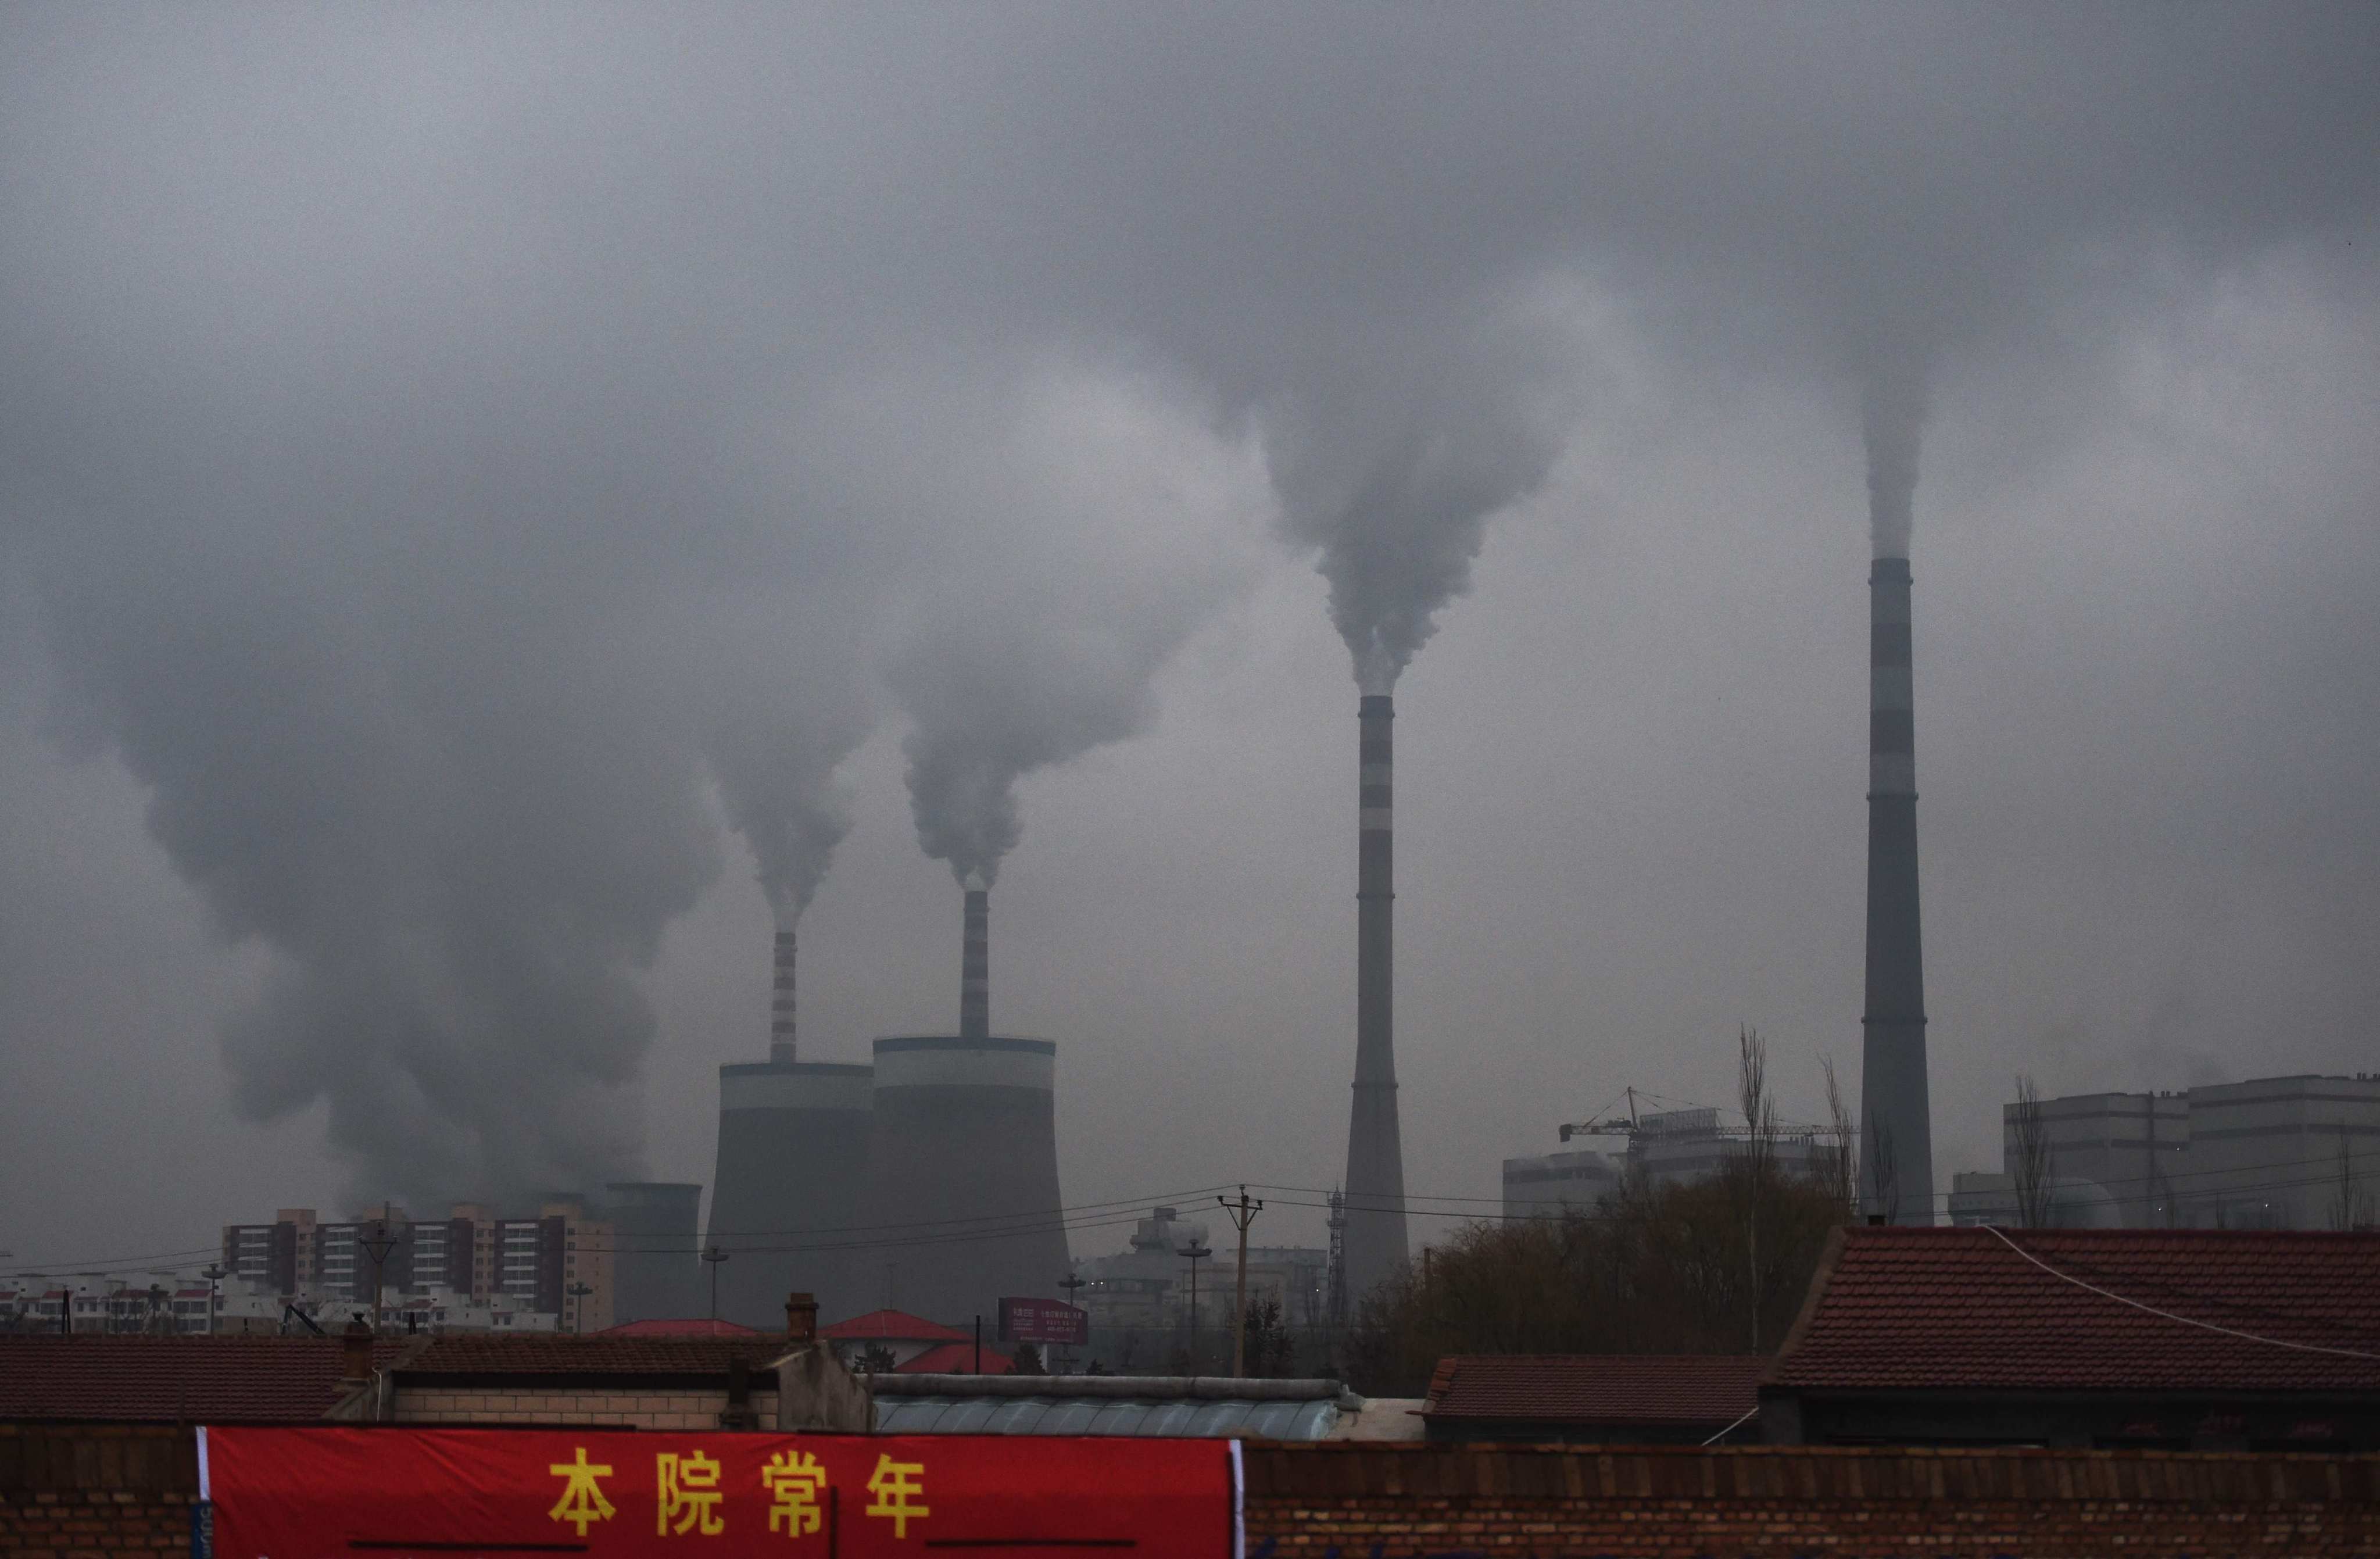 Smoke belches from a coal-fuelled power station near Datong, in China’s northern Shanxi province. The country aims to become carbon neutral by 2060. Photo: AFP